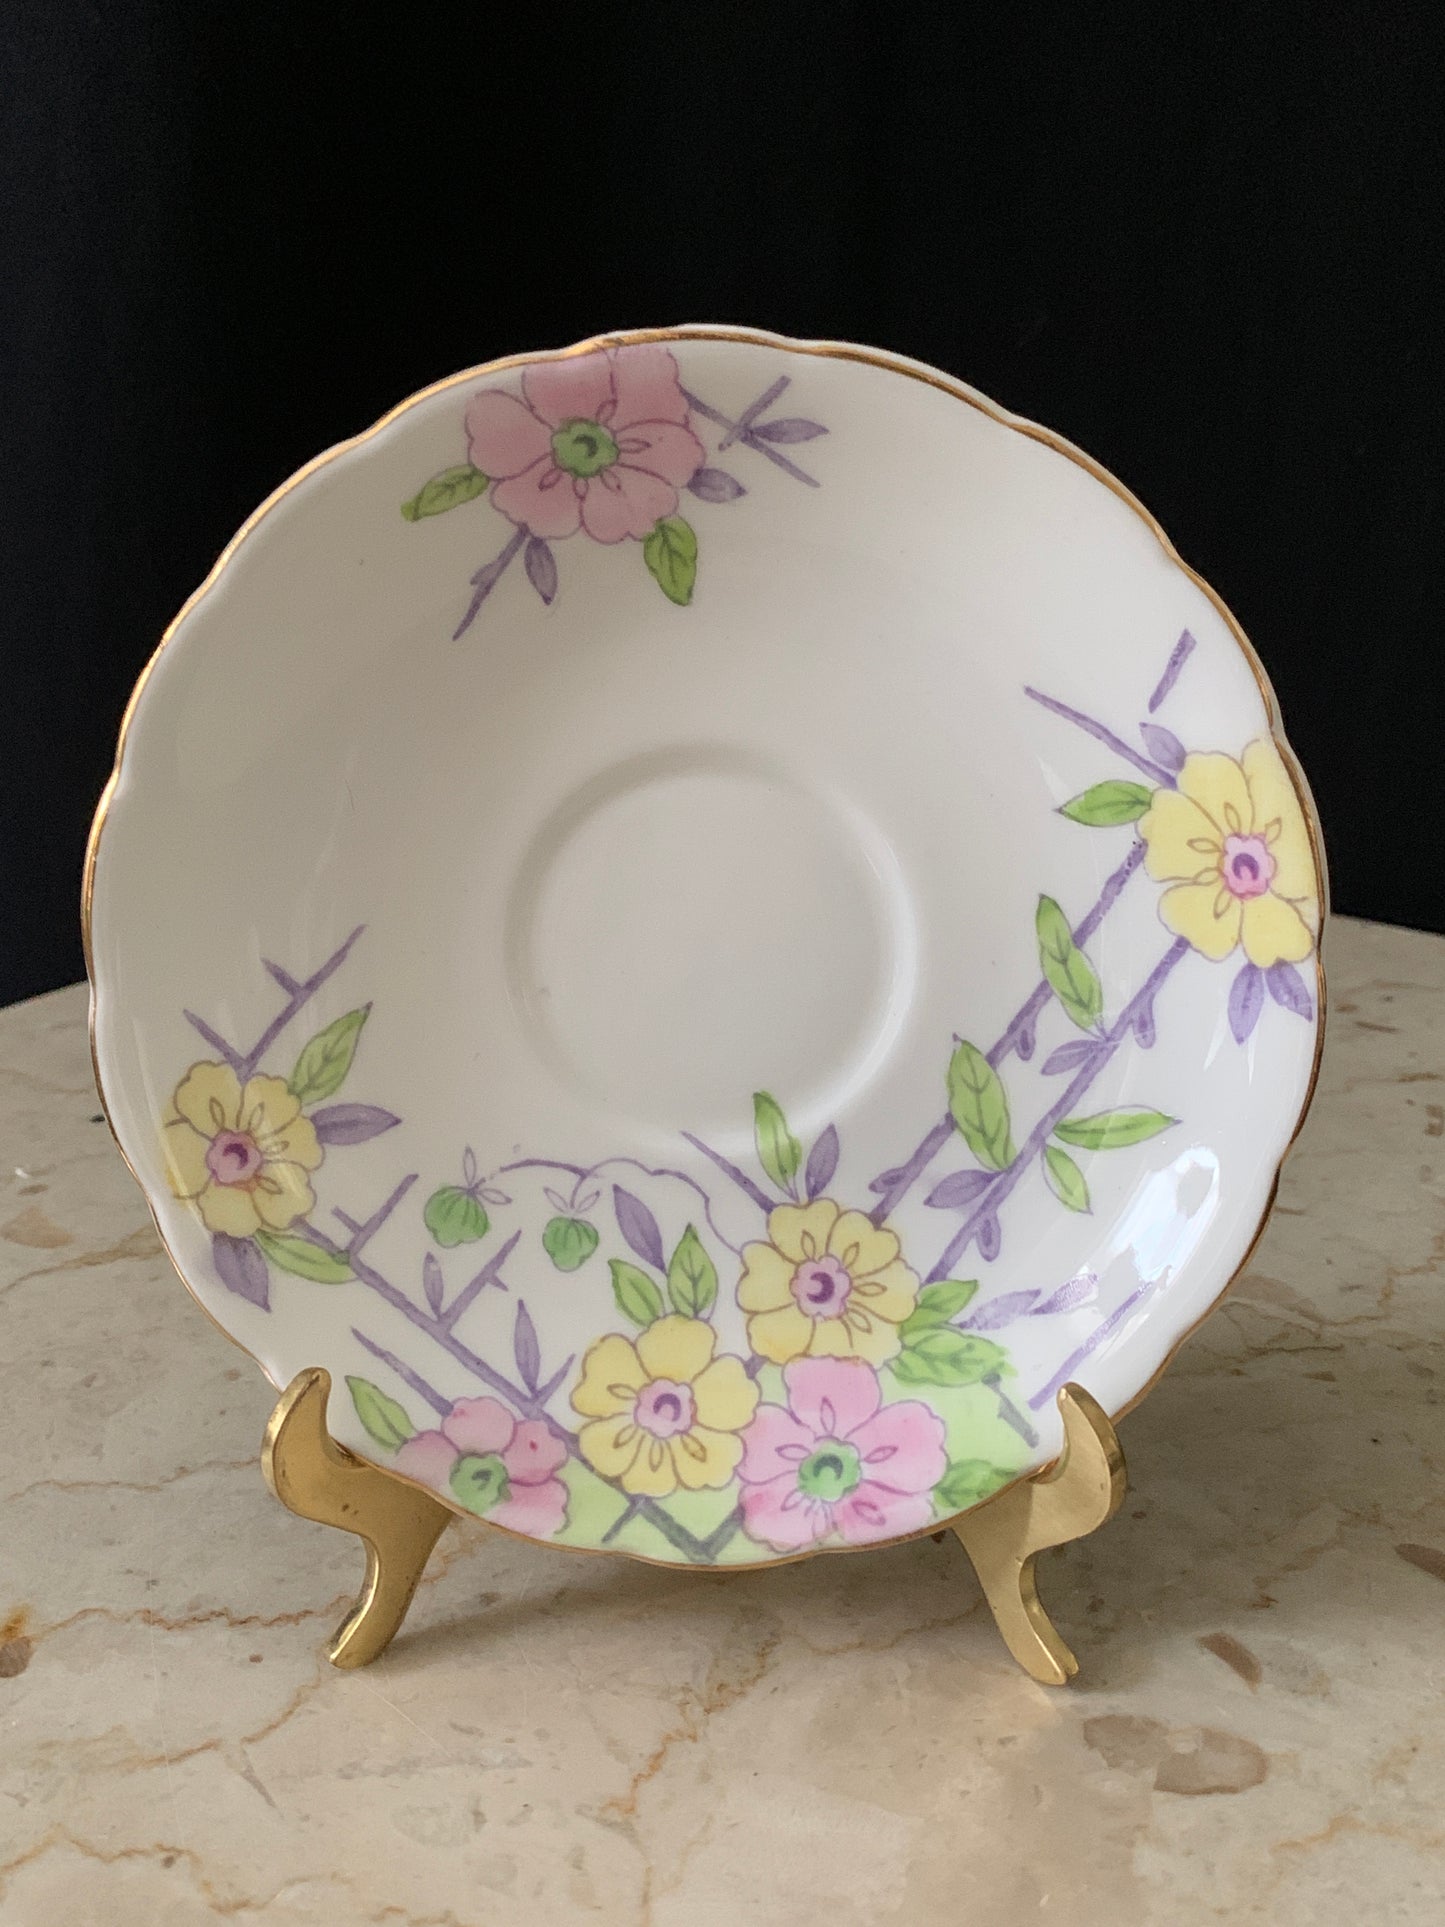 Pink and Yellow Floral Tea Cup Colclough China Vintage Teacup